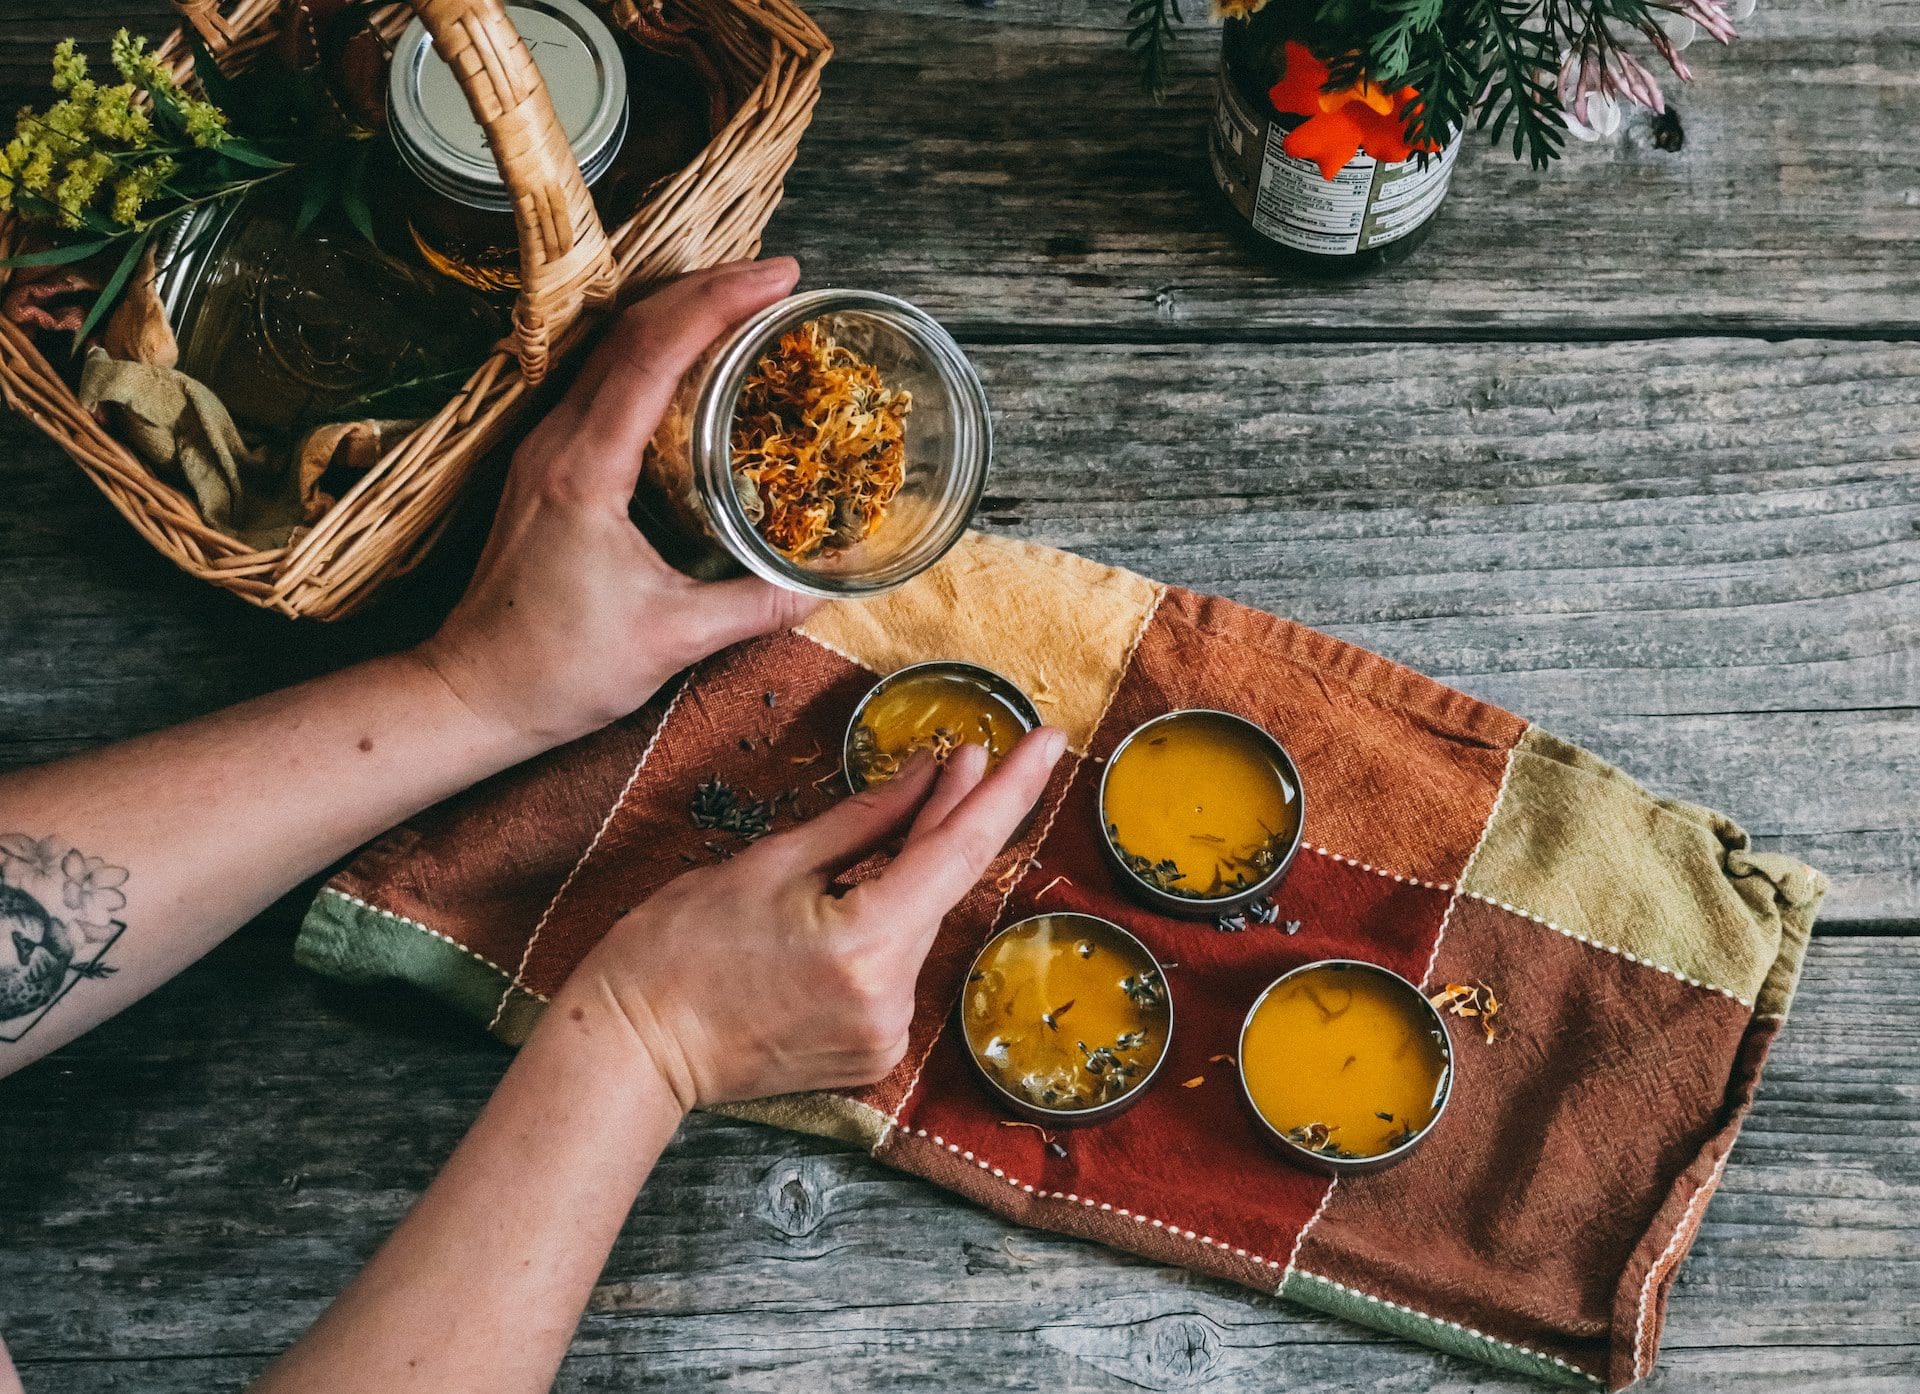 Exploring the Benefits of Alternative Medicine: How to Popularize Natural Remedies